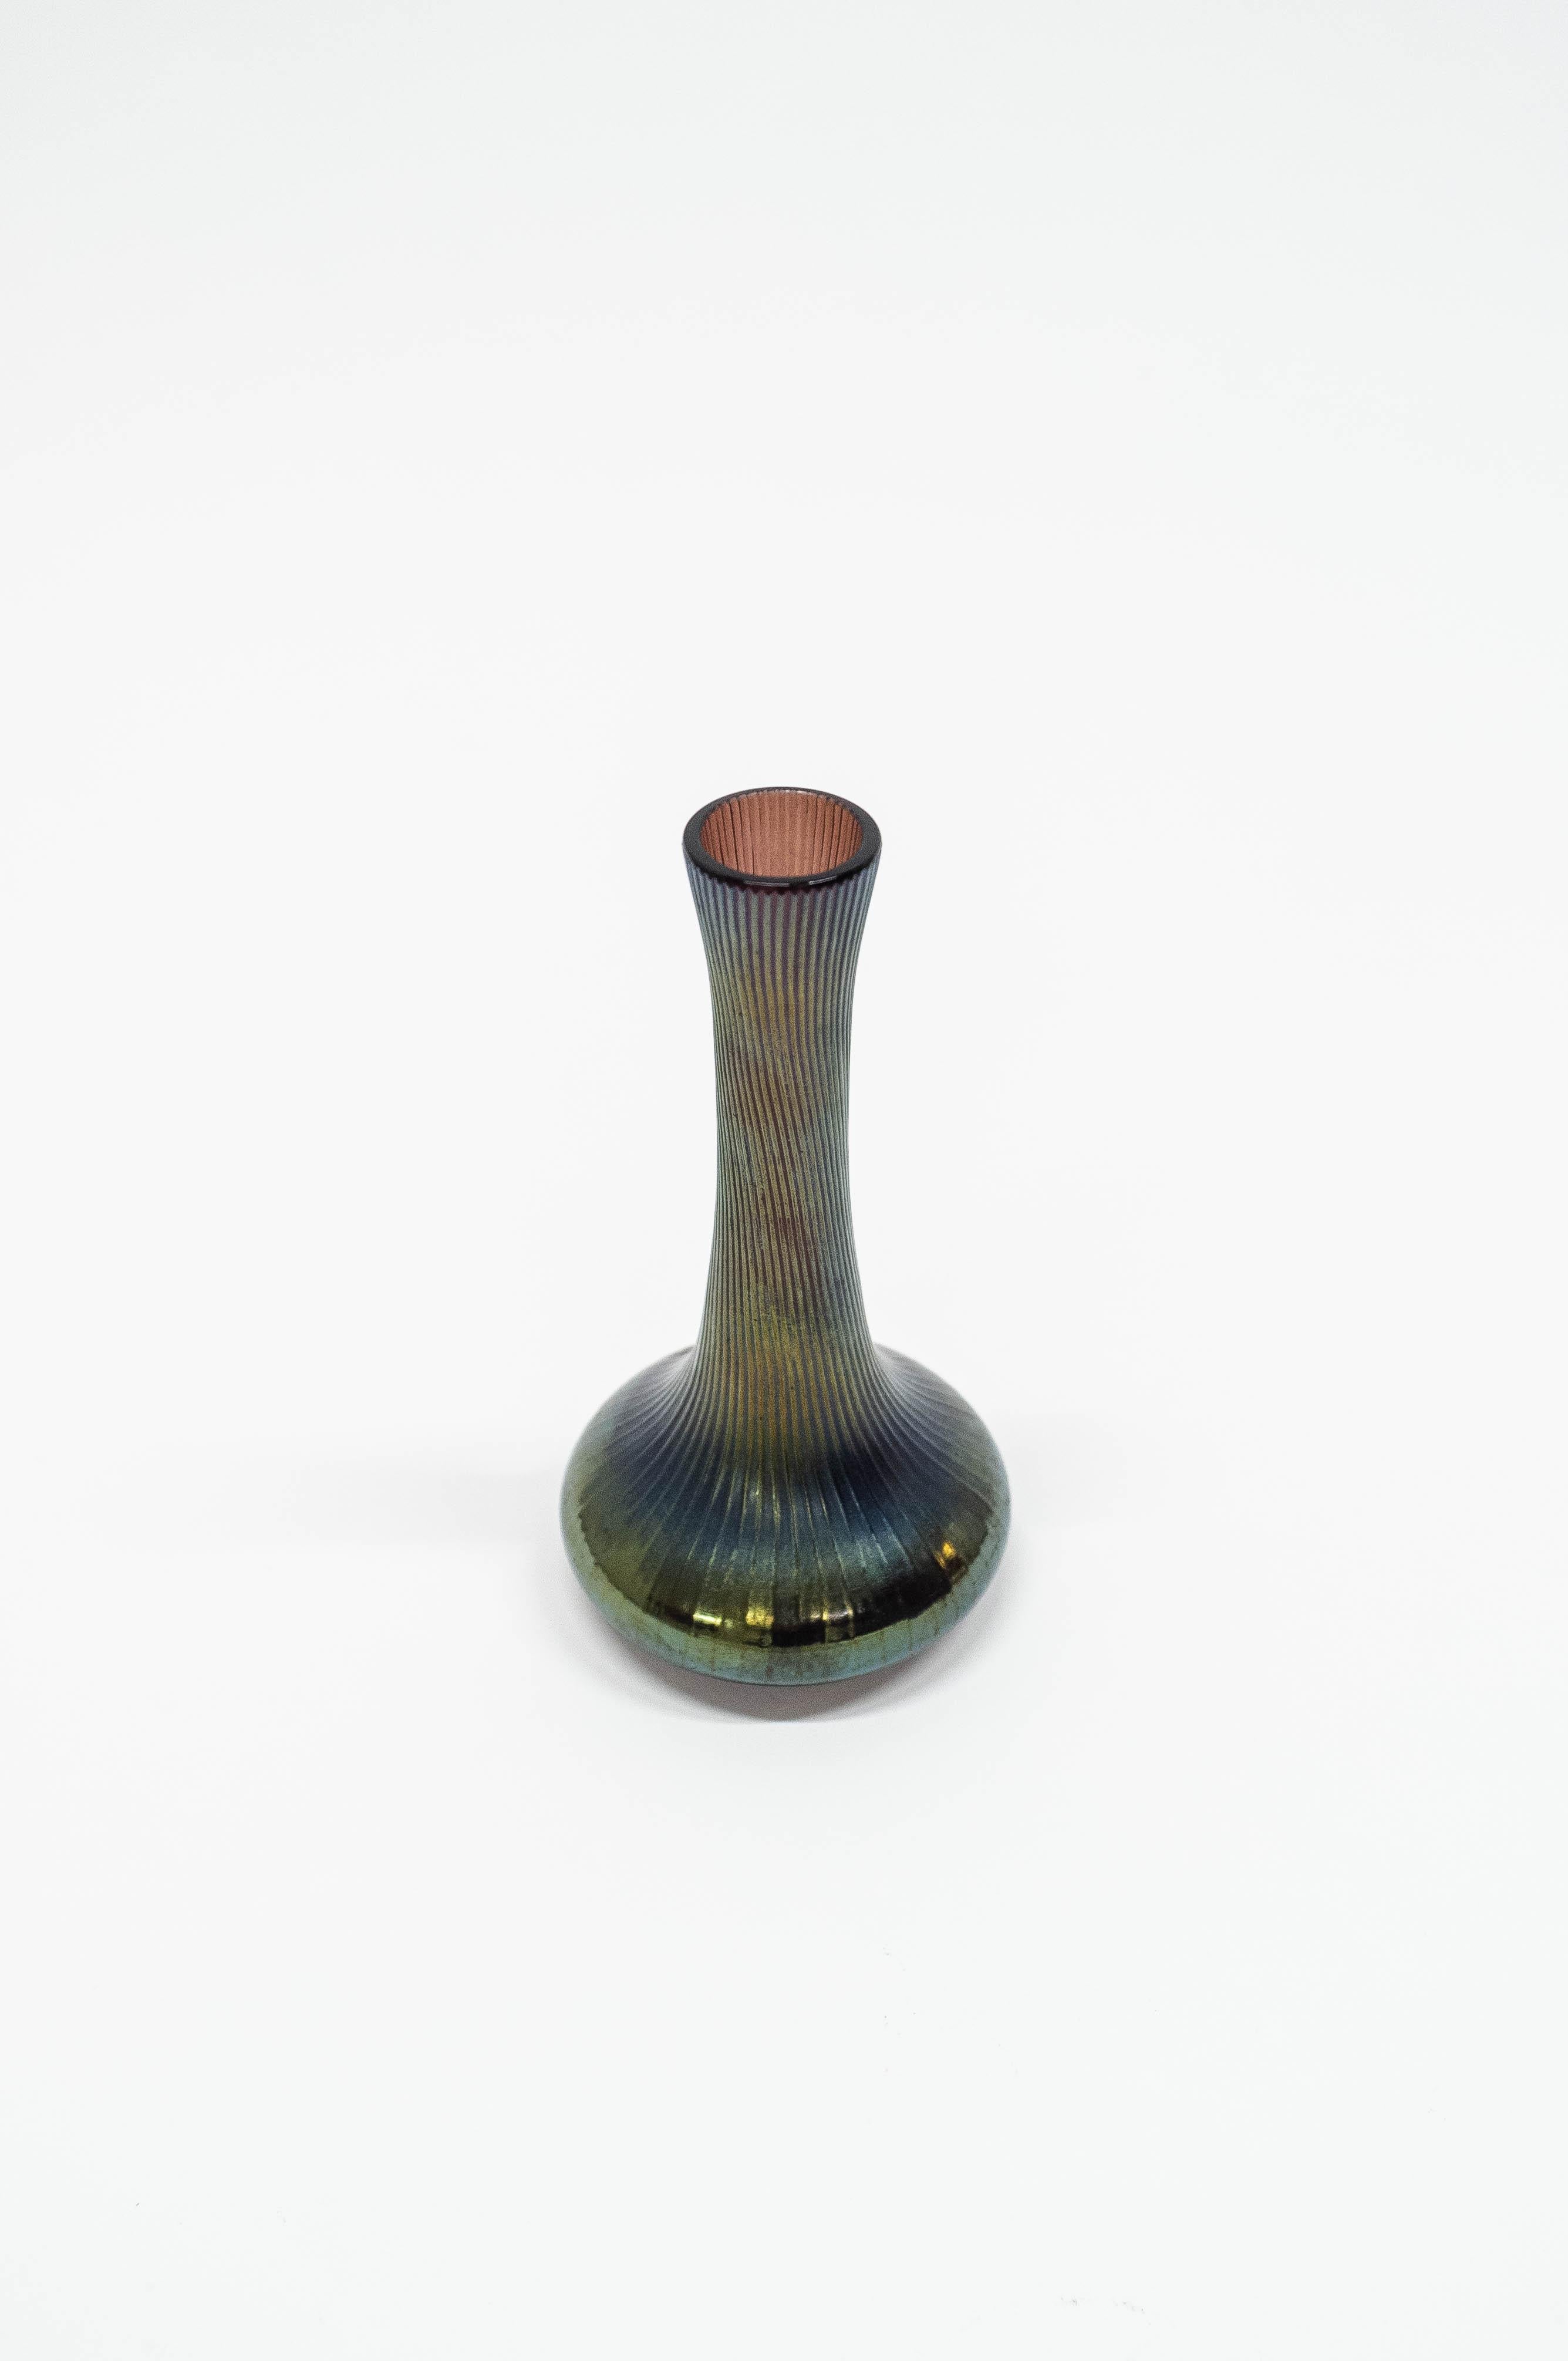 Early 20th Century Austrian Art Deco Vase from 1920s